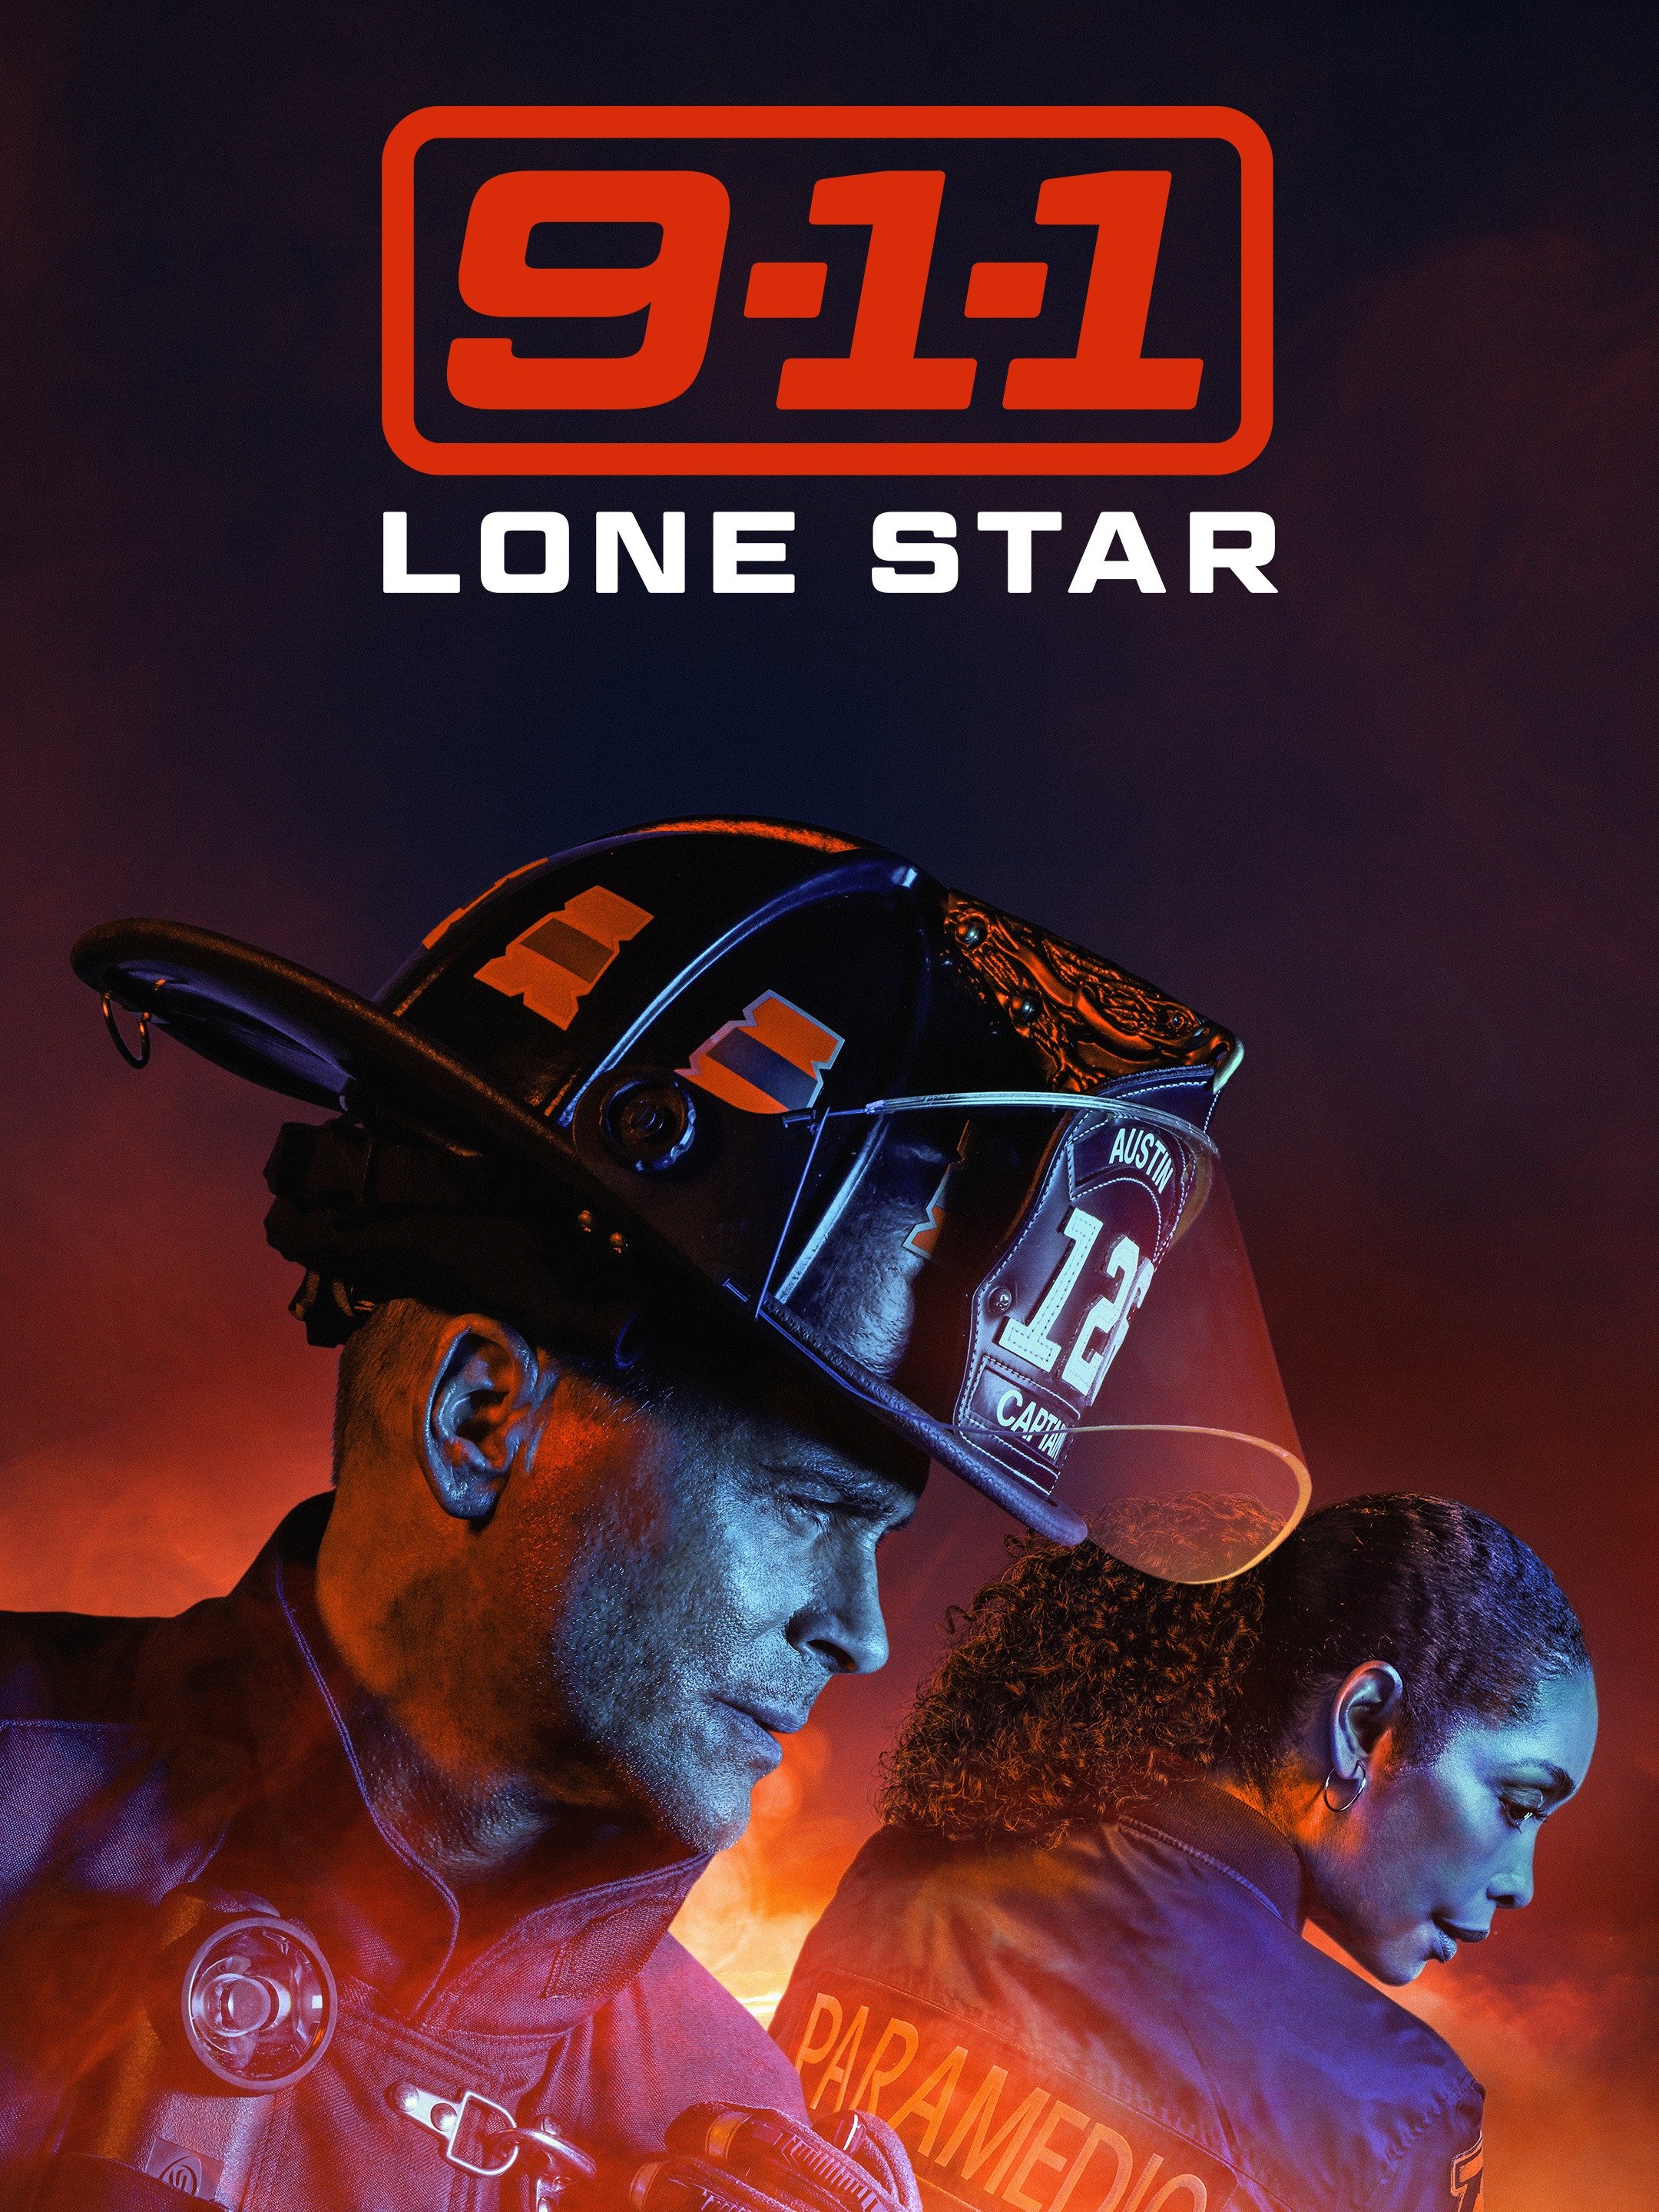 reviews of 911 lone star